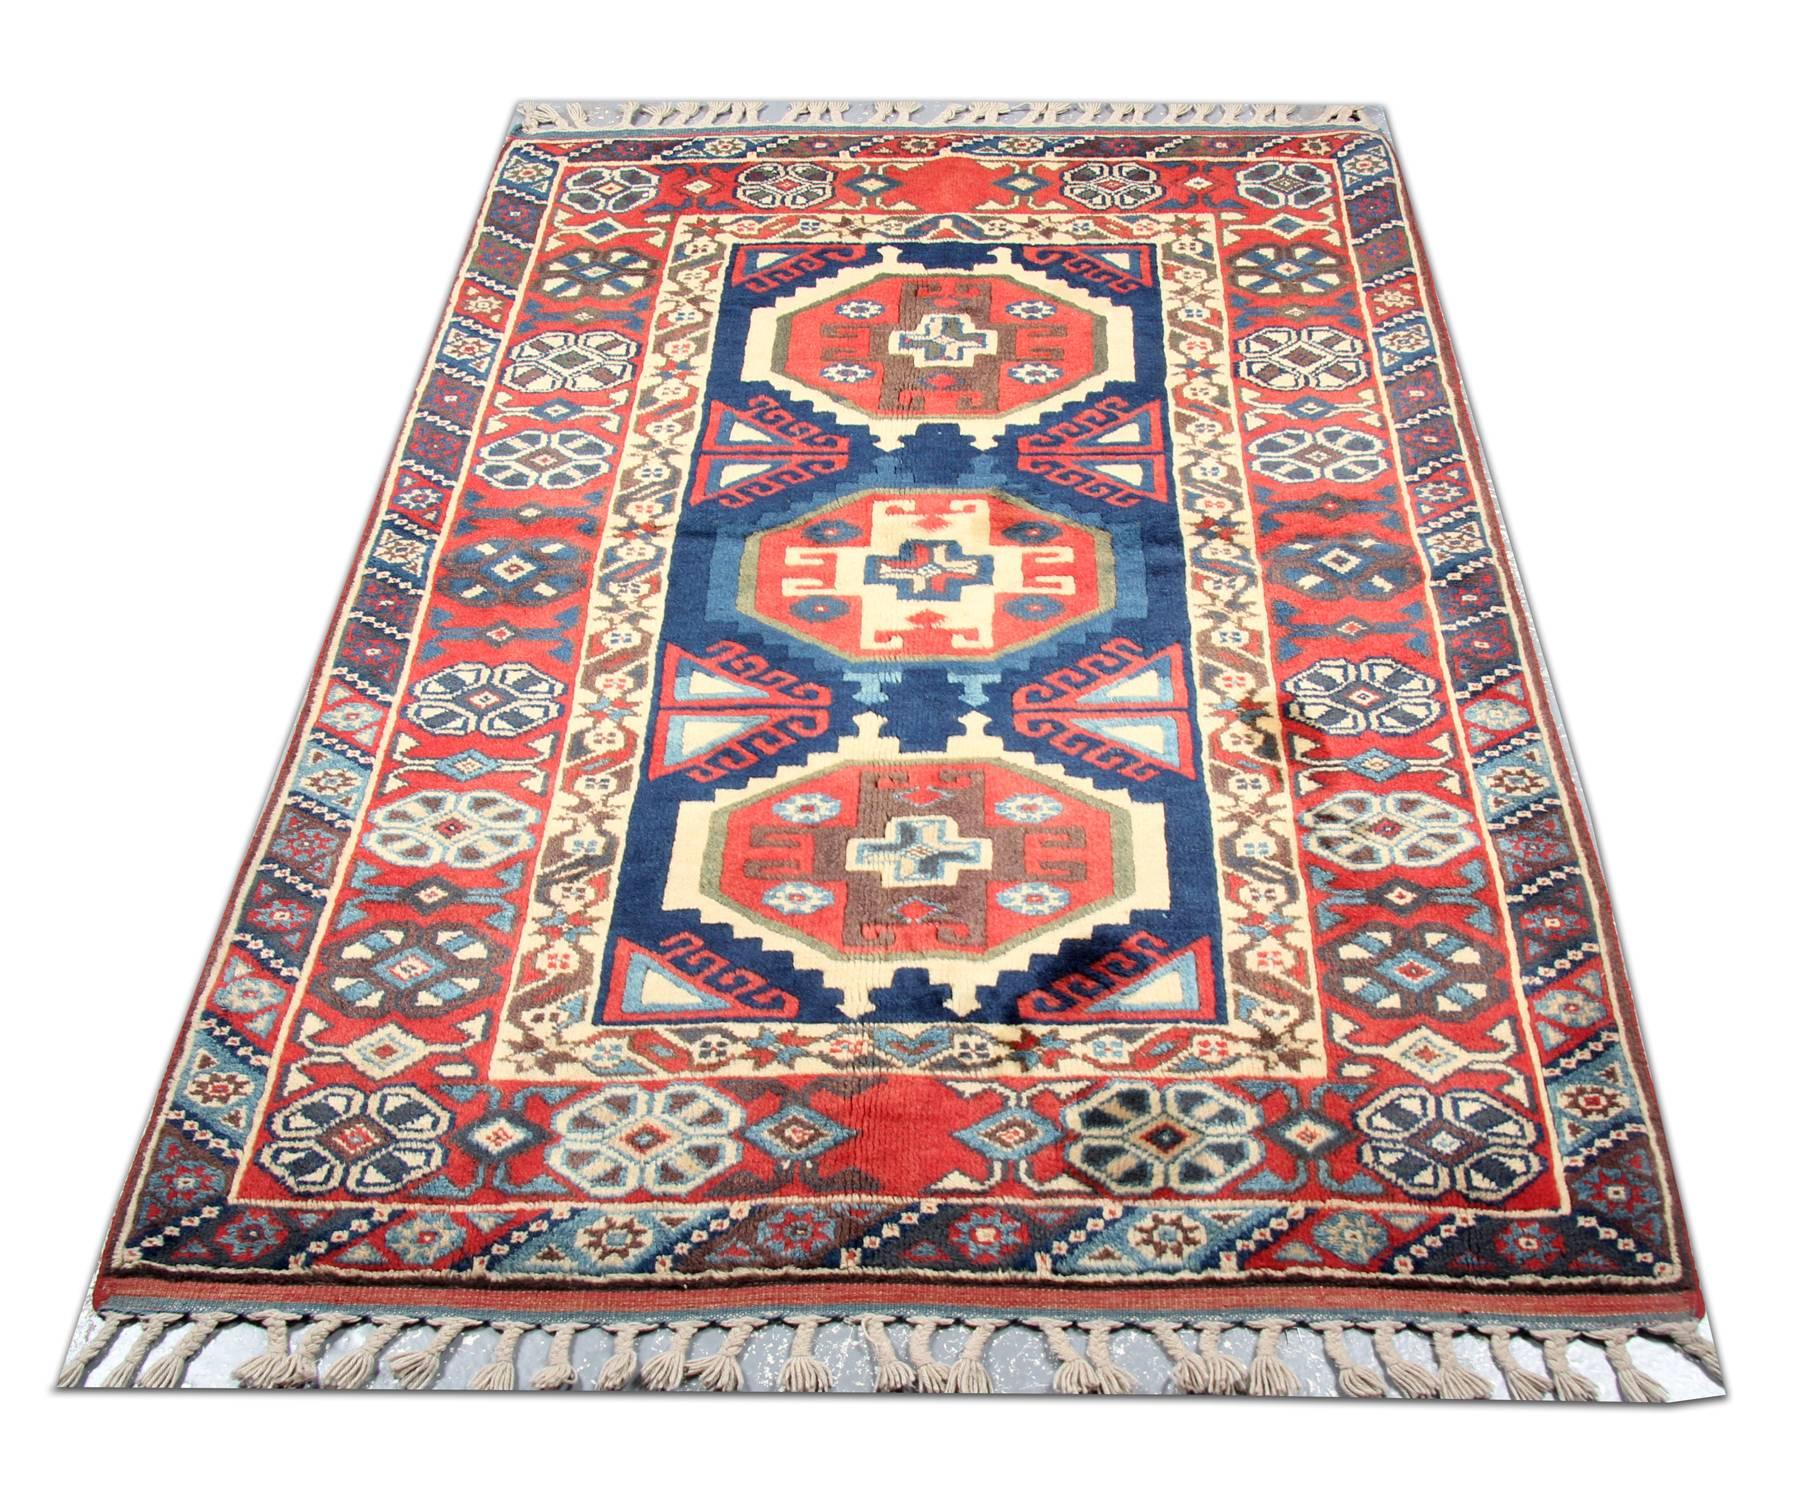 This beautiful geometric rug has been woven with a fantastic design and colour combination. Featuring colours of blue, red, ivory and green are woven beautifully to create this eye-catching rug. This rug would make a perfect addition to any home.